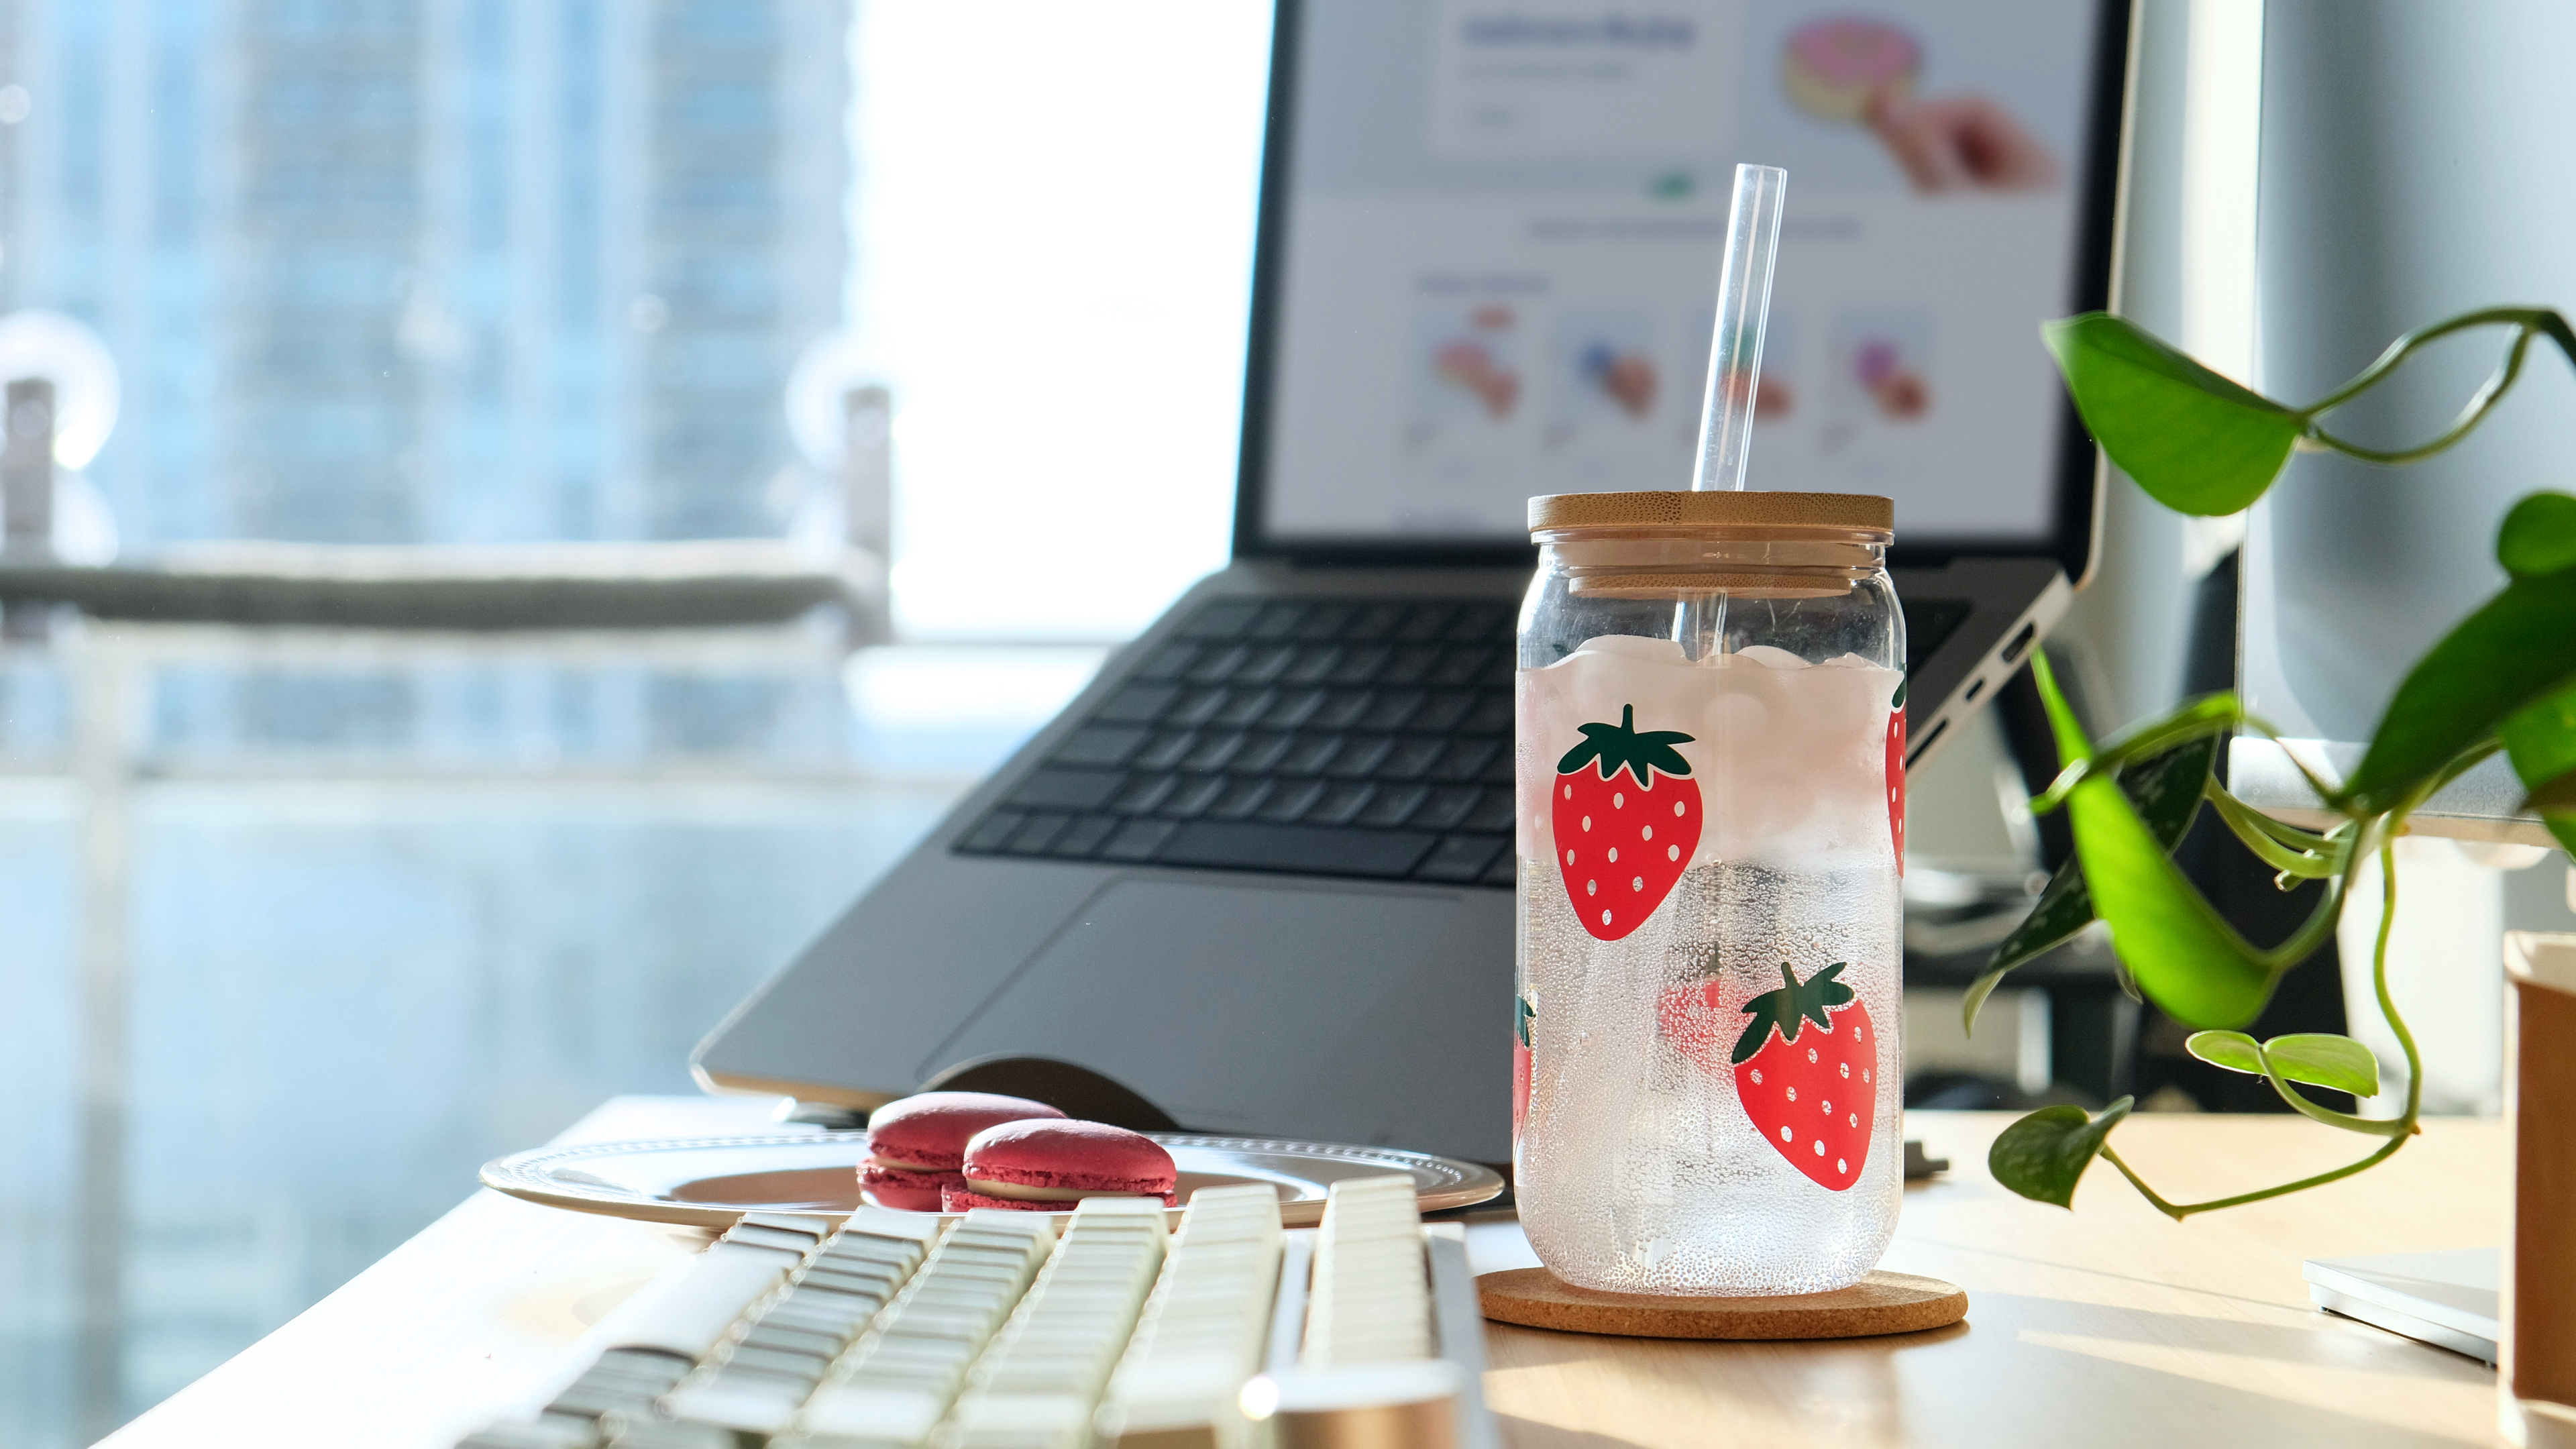 Strawberry tumbler and laptop